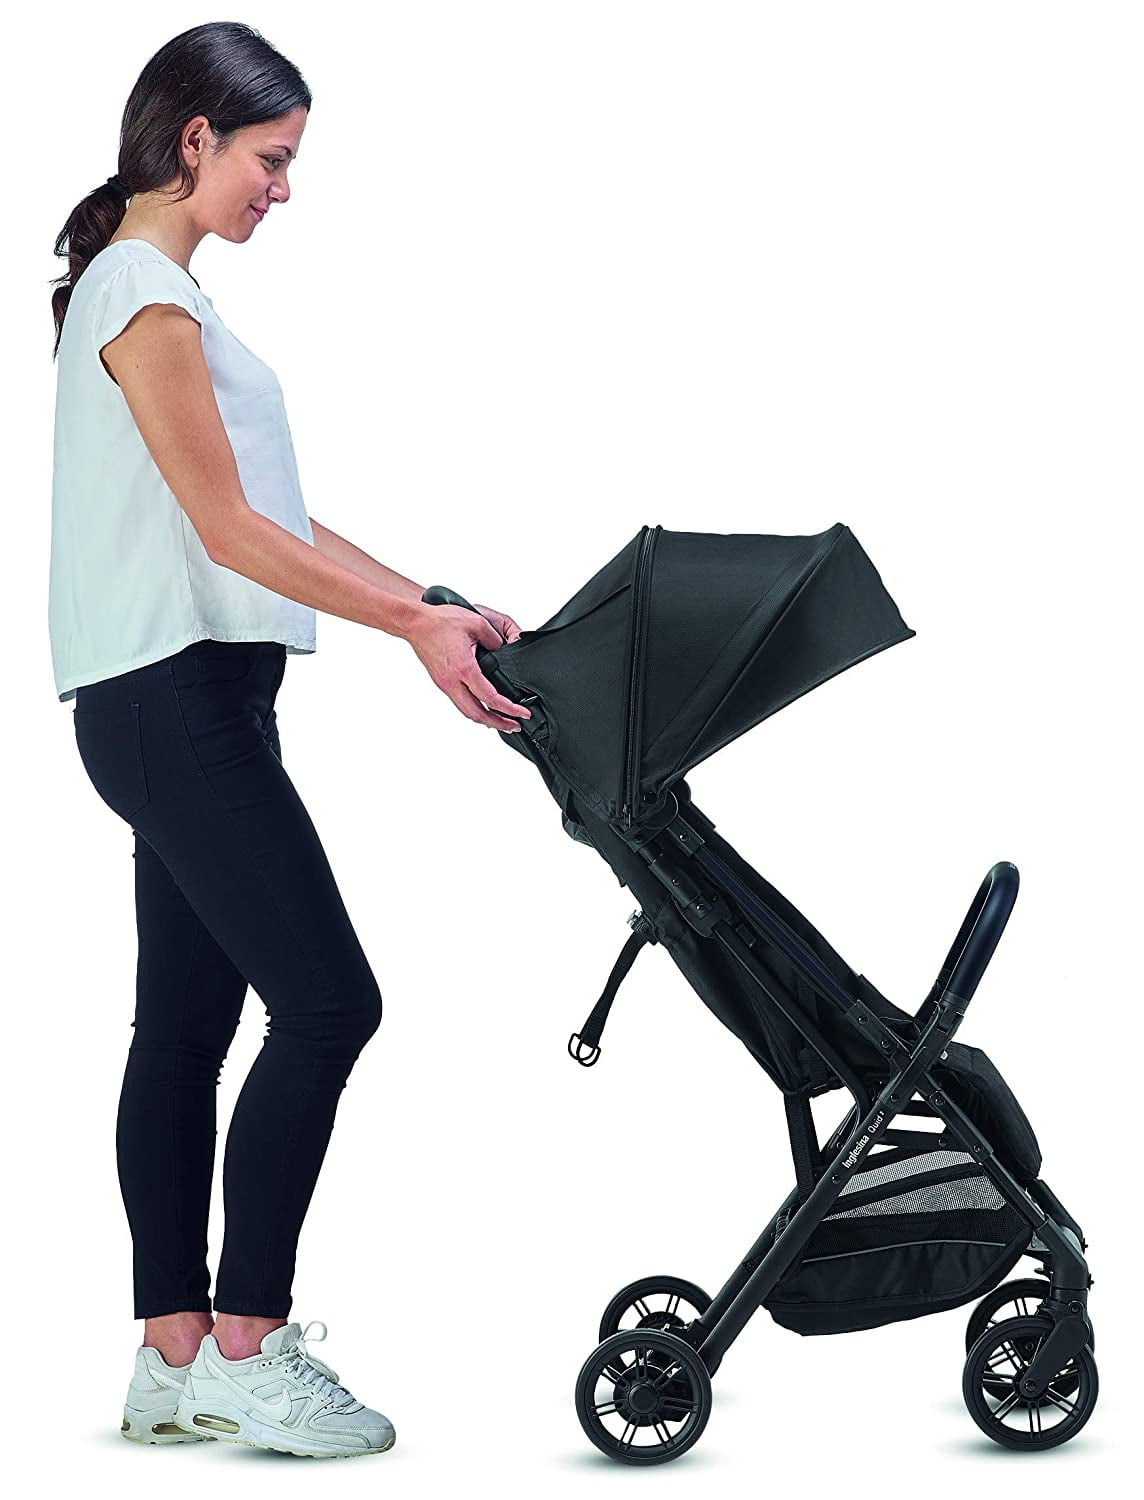 Inglesina Quid Baby Stroller - Lightweight at 13 lbs, Travel-Friendly,  Ultra-Compact & Folding - Fits in Airplane Cabin & Overhead - for Toddlers  from